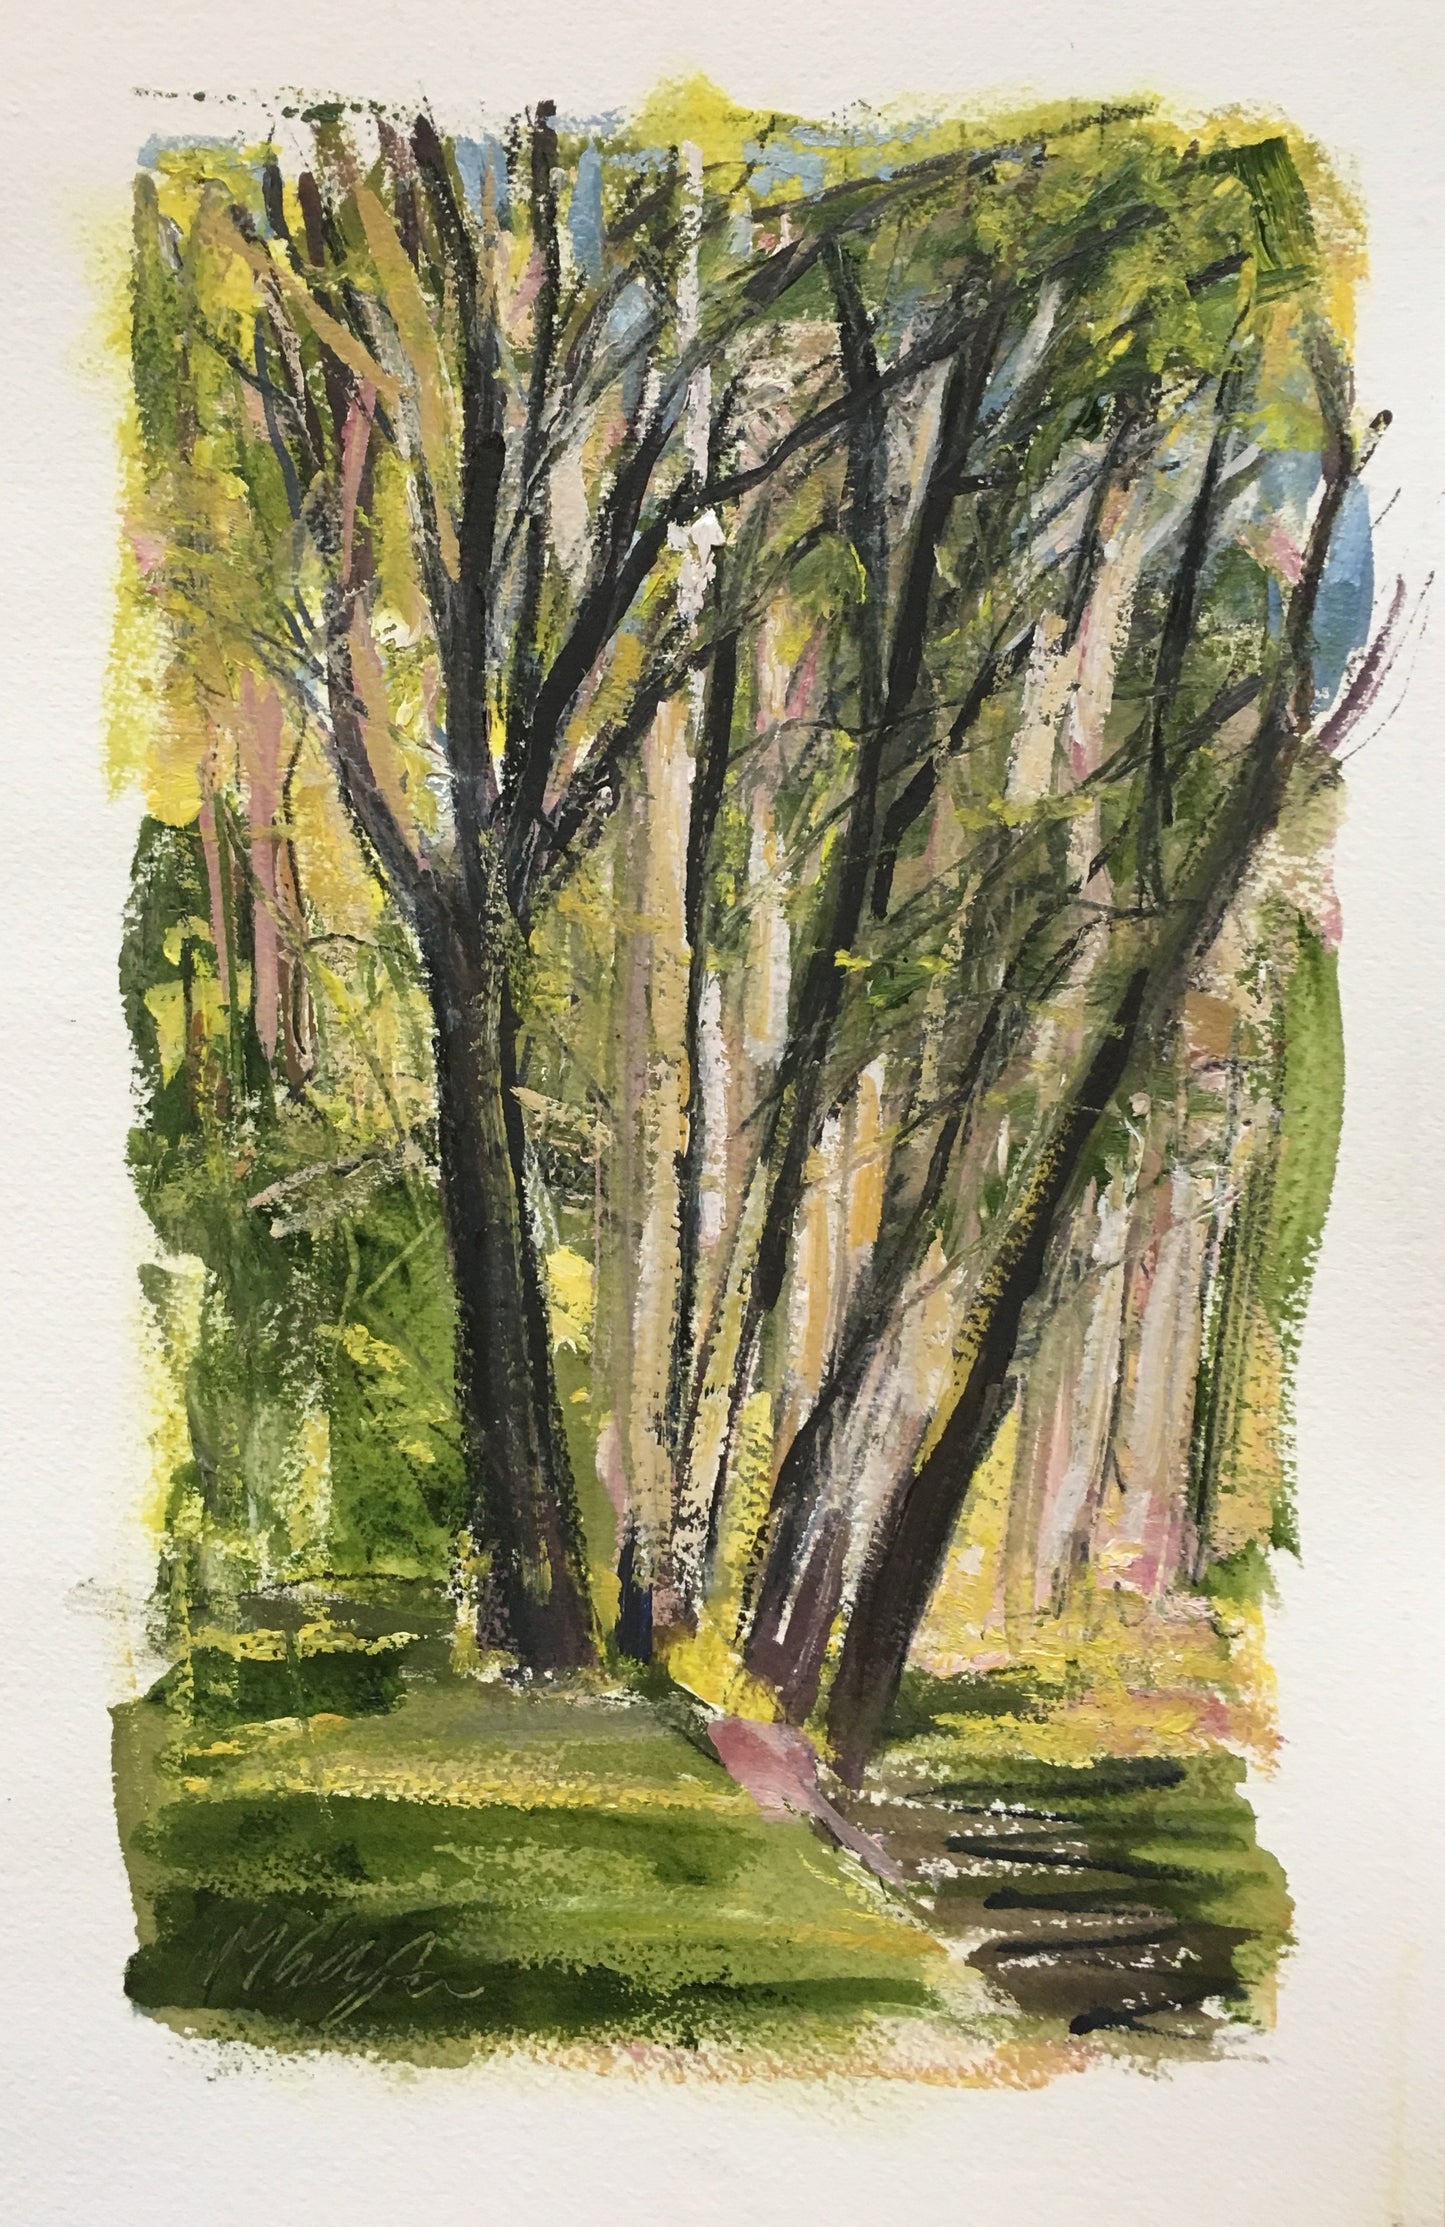 Trees, Clinton Corners, 5:00 pm, May 11th, 2019